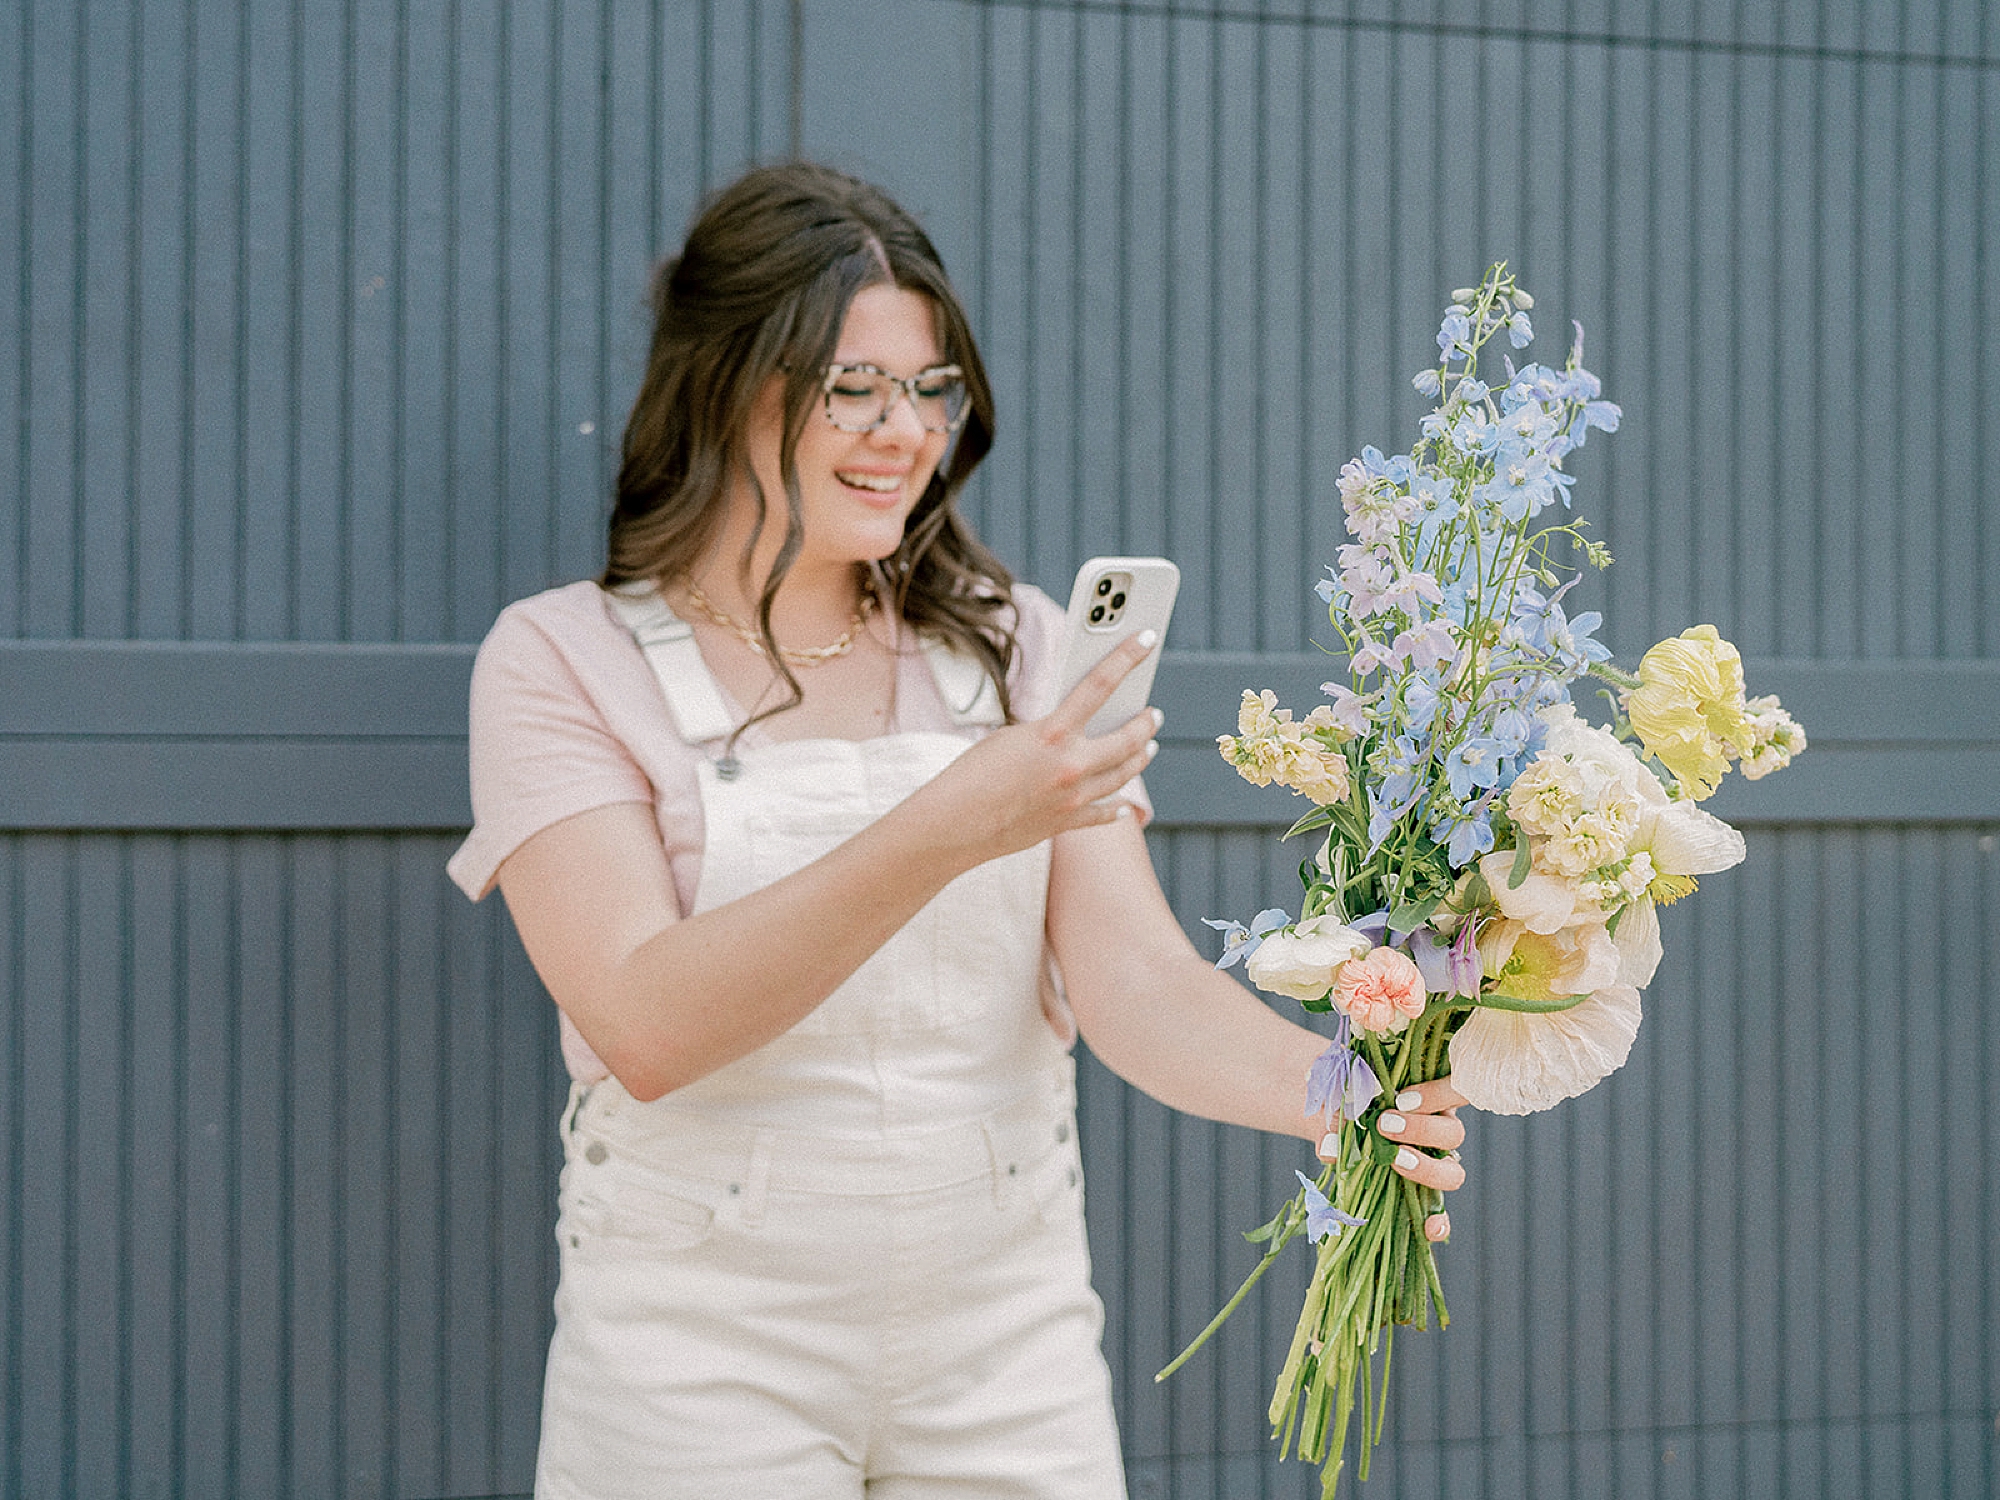 business educator holds bouquet in front of her and takes photo